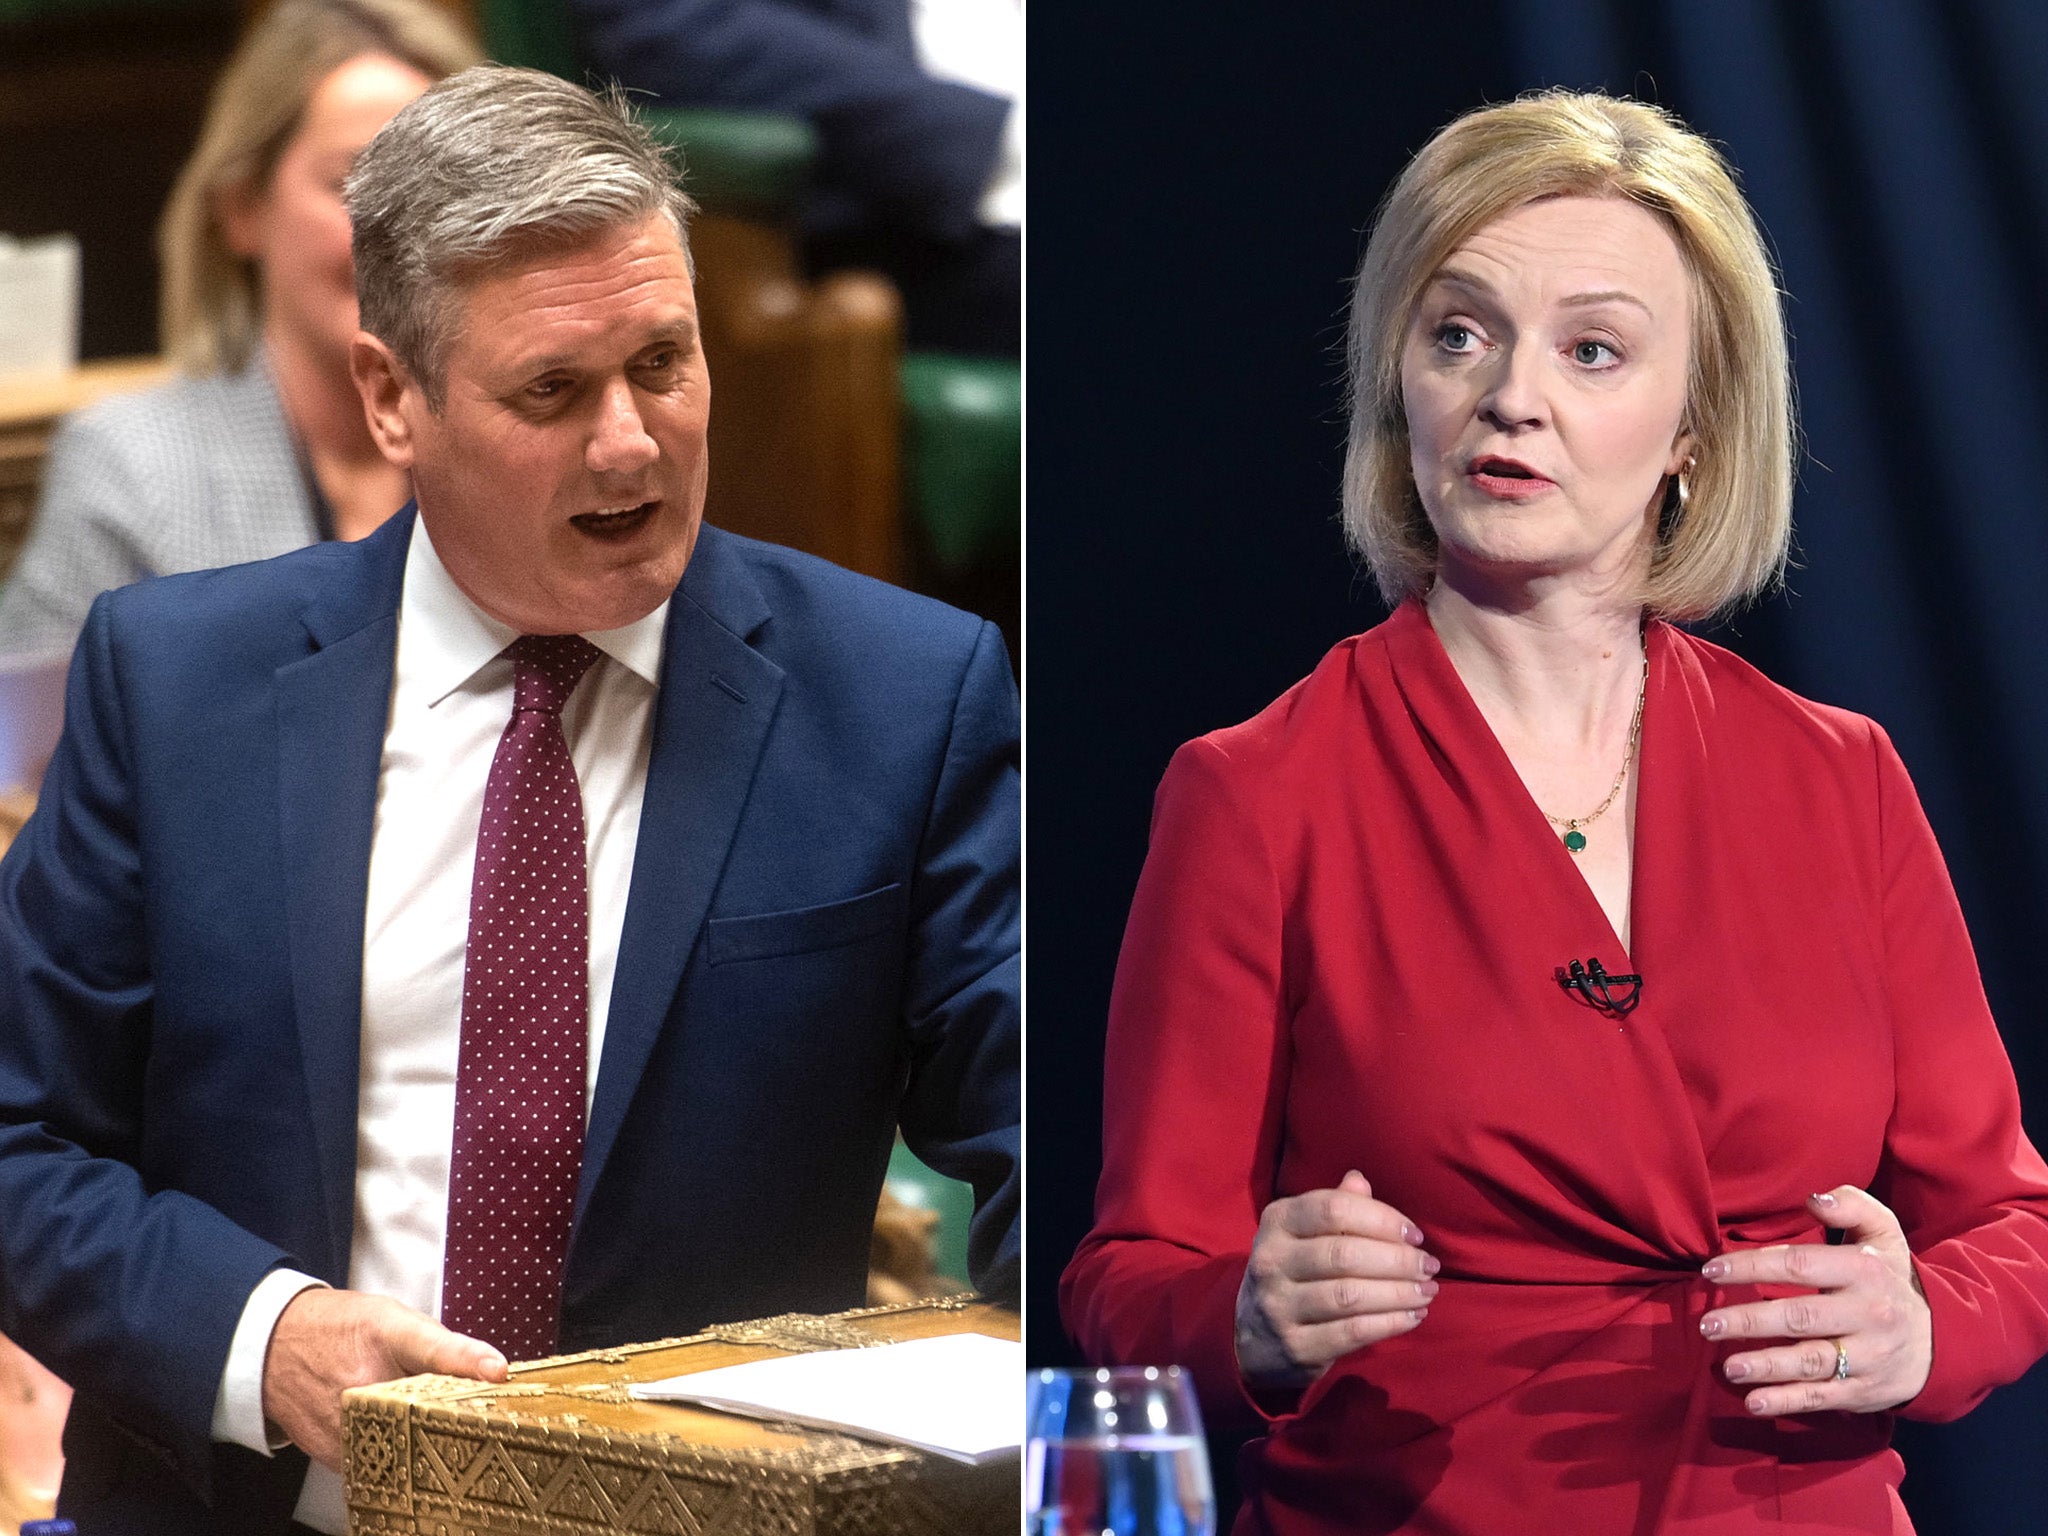 Liz Truss is the least popular of the remaining three Tory leadership contenders among Labour voters, but Keir Starmer says: ‘I really don’t mind who I go up against’